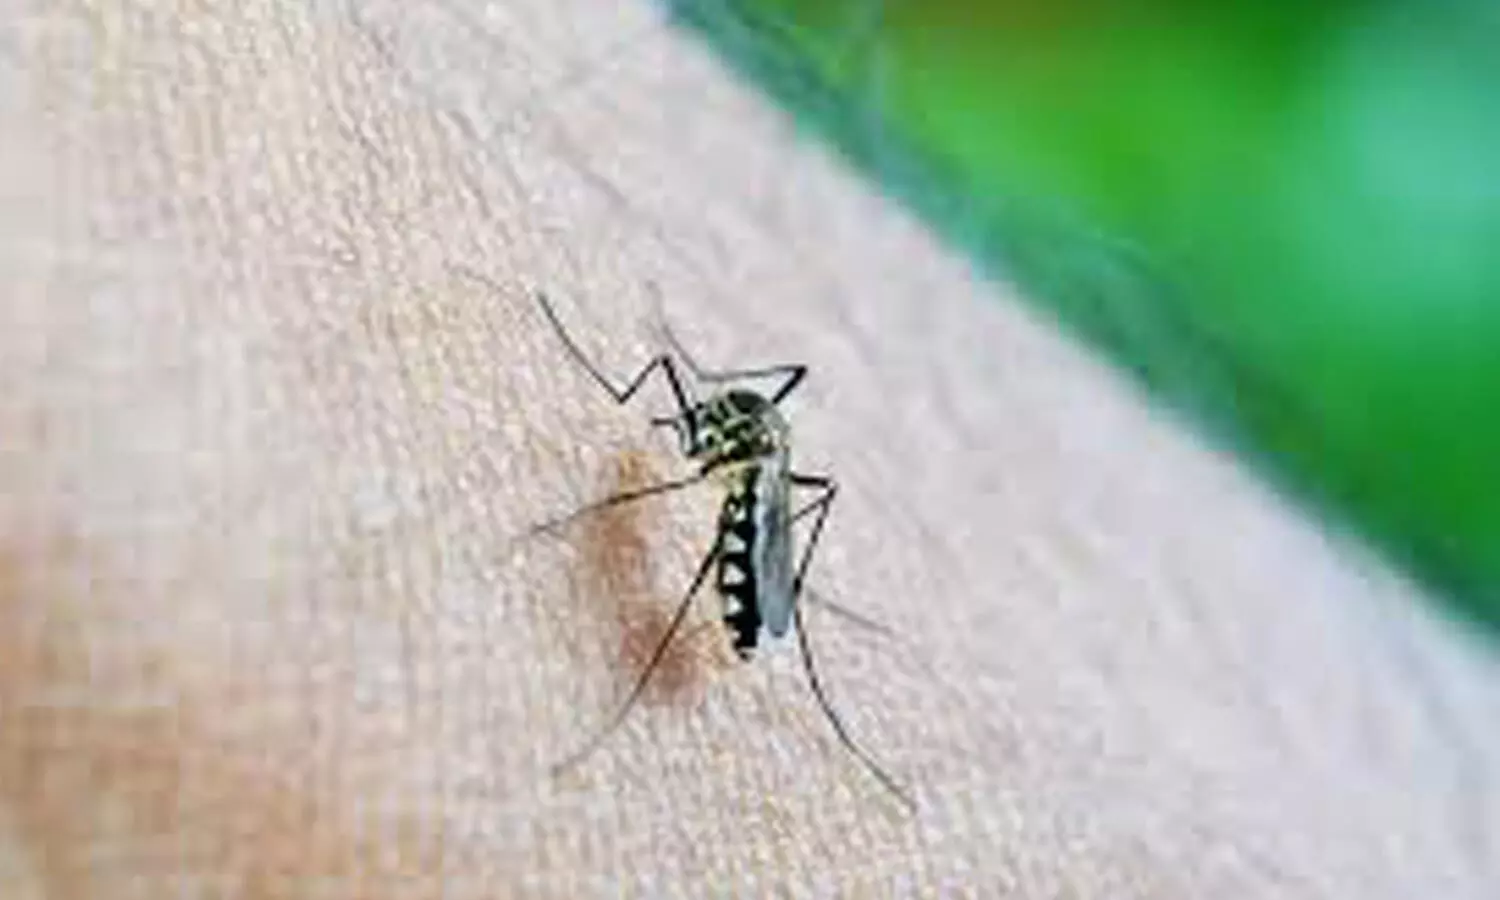 New monoclonal antibody promising against malaria sans any safety concerns: NEJM